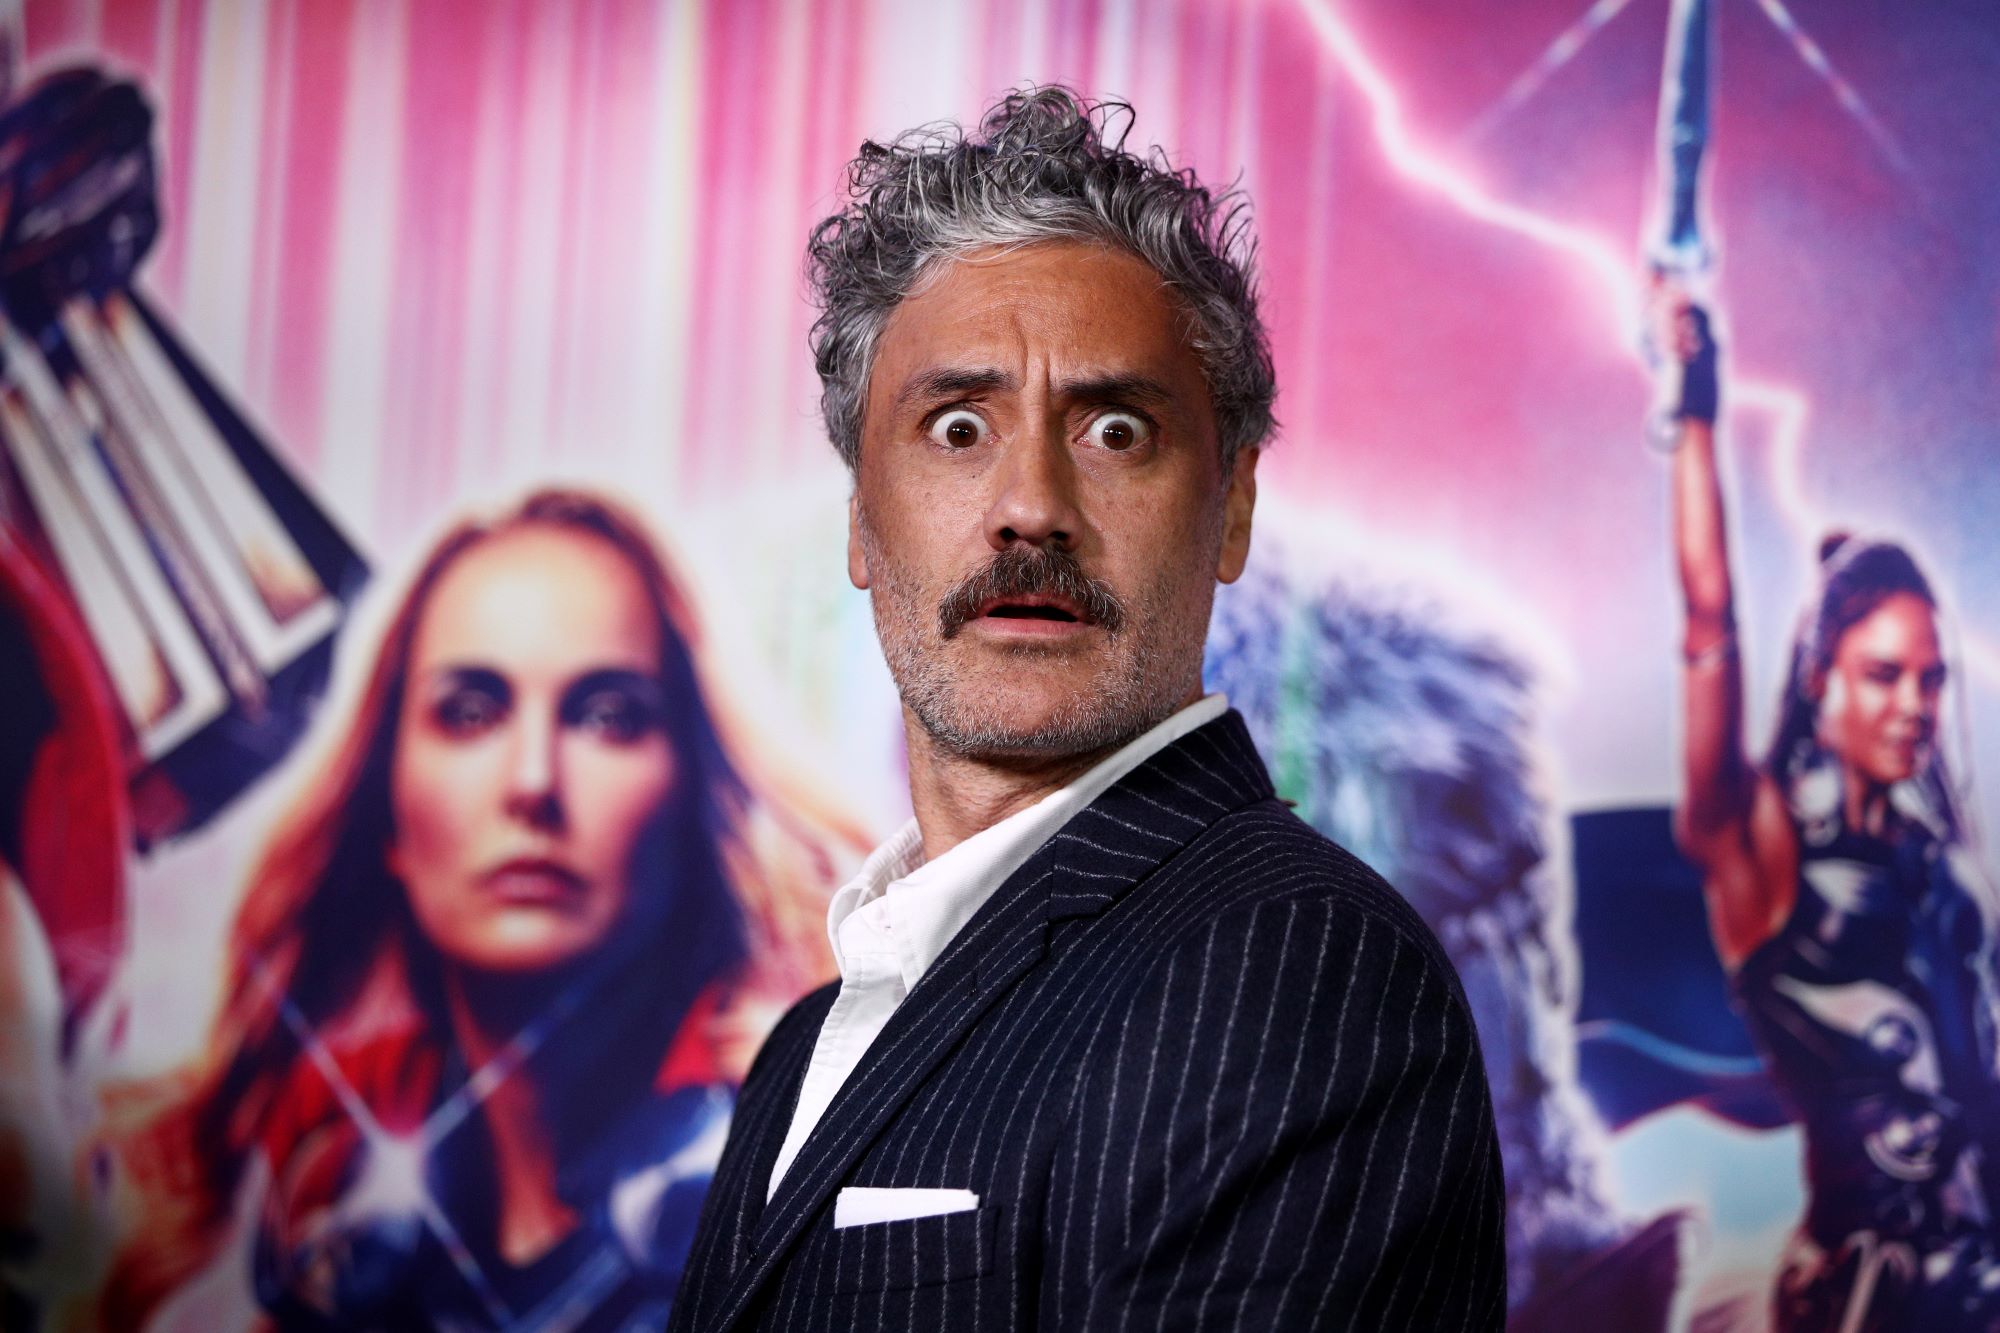 Taika Waititi, who directed 'Thor: Love and Thunder,' wears a black suit with thin white vertical stripes on it over a white button-up shirt.